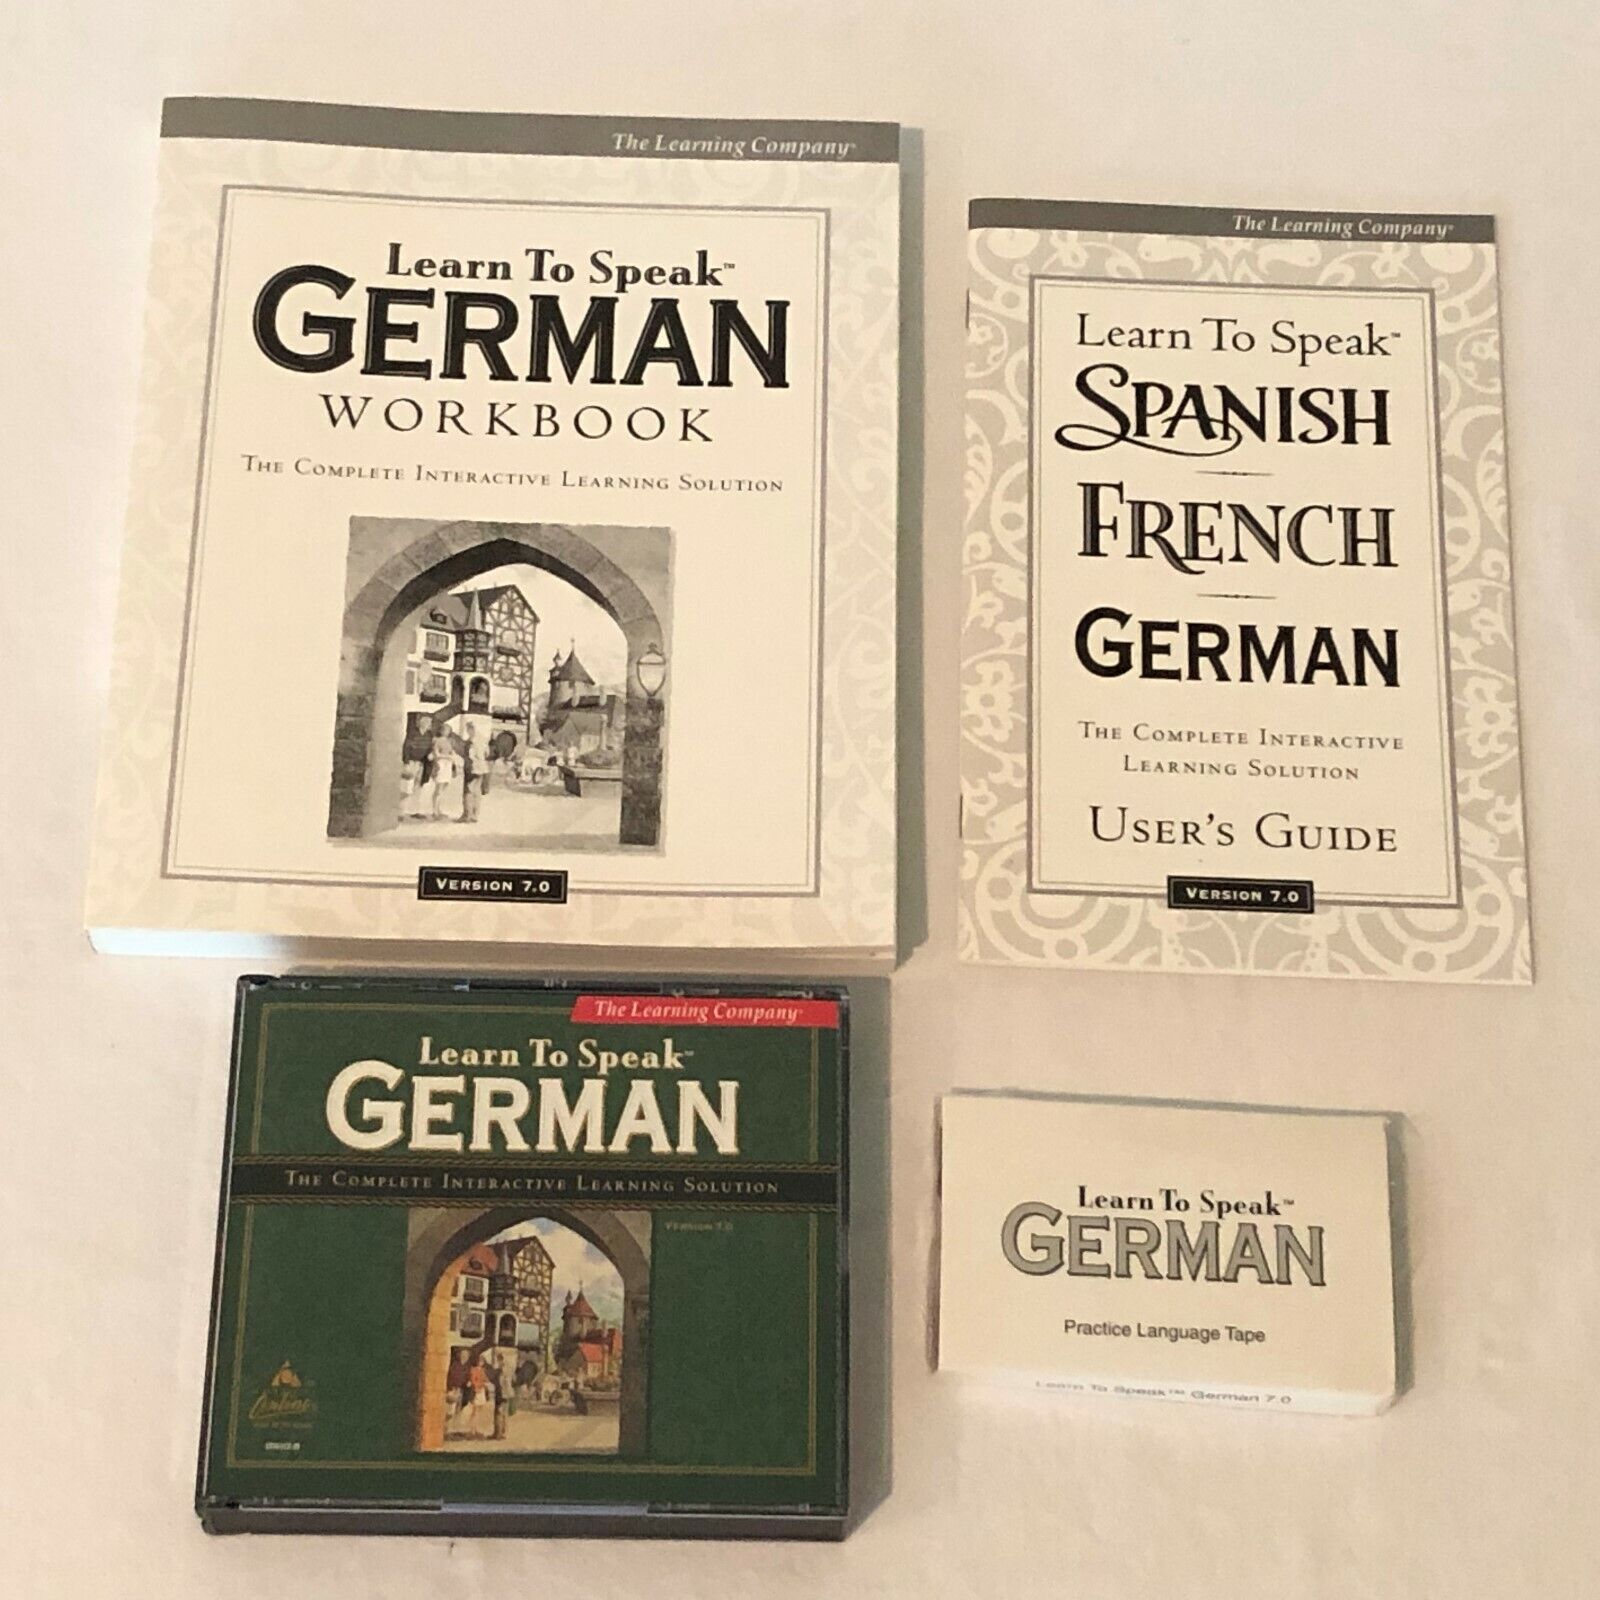 Learn to Speak German 7 The Learning Company 3 CDs Set PC Comp...